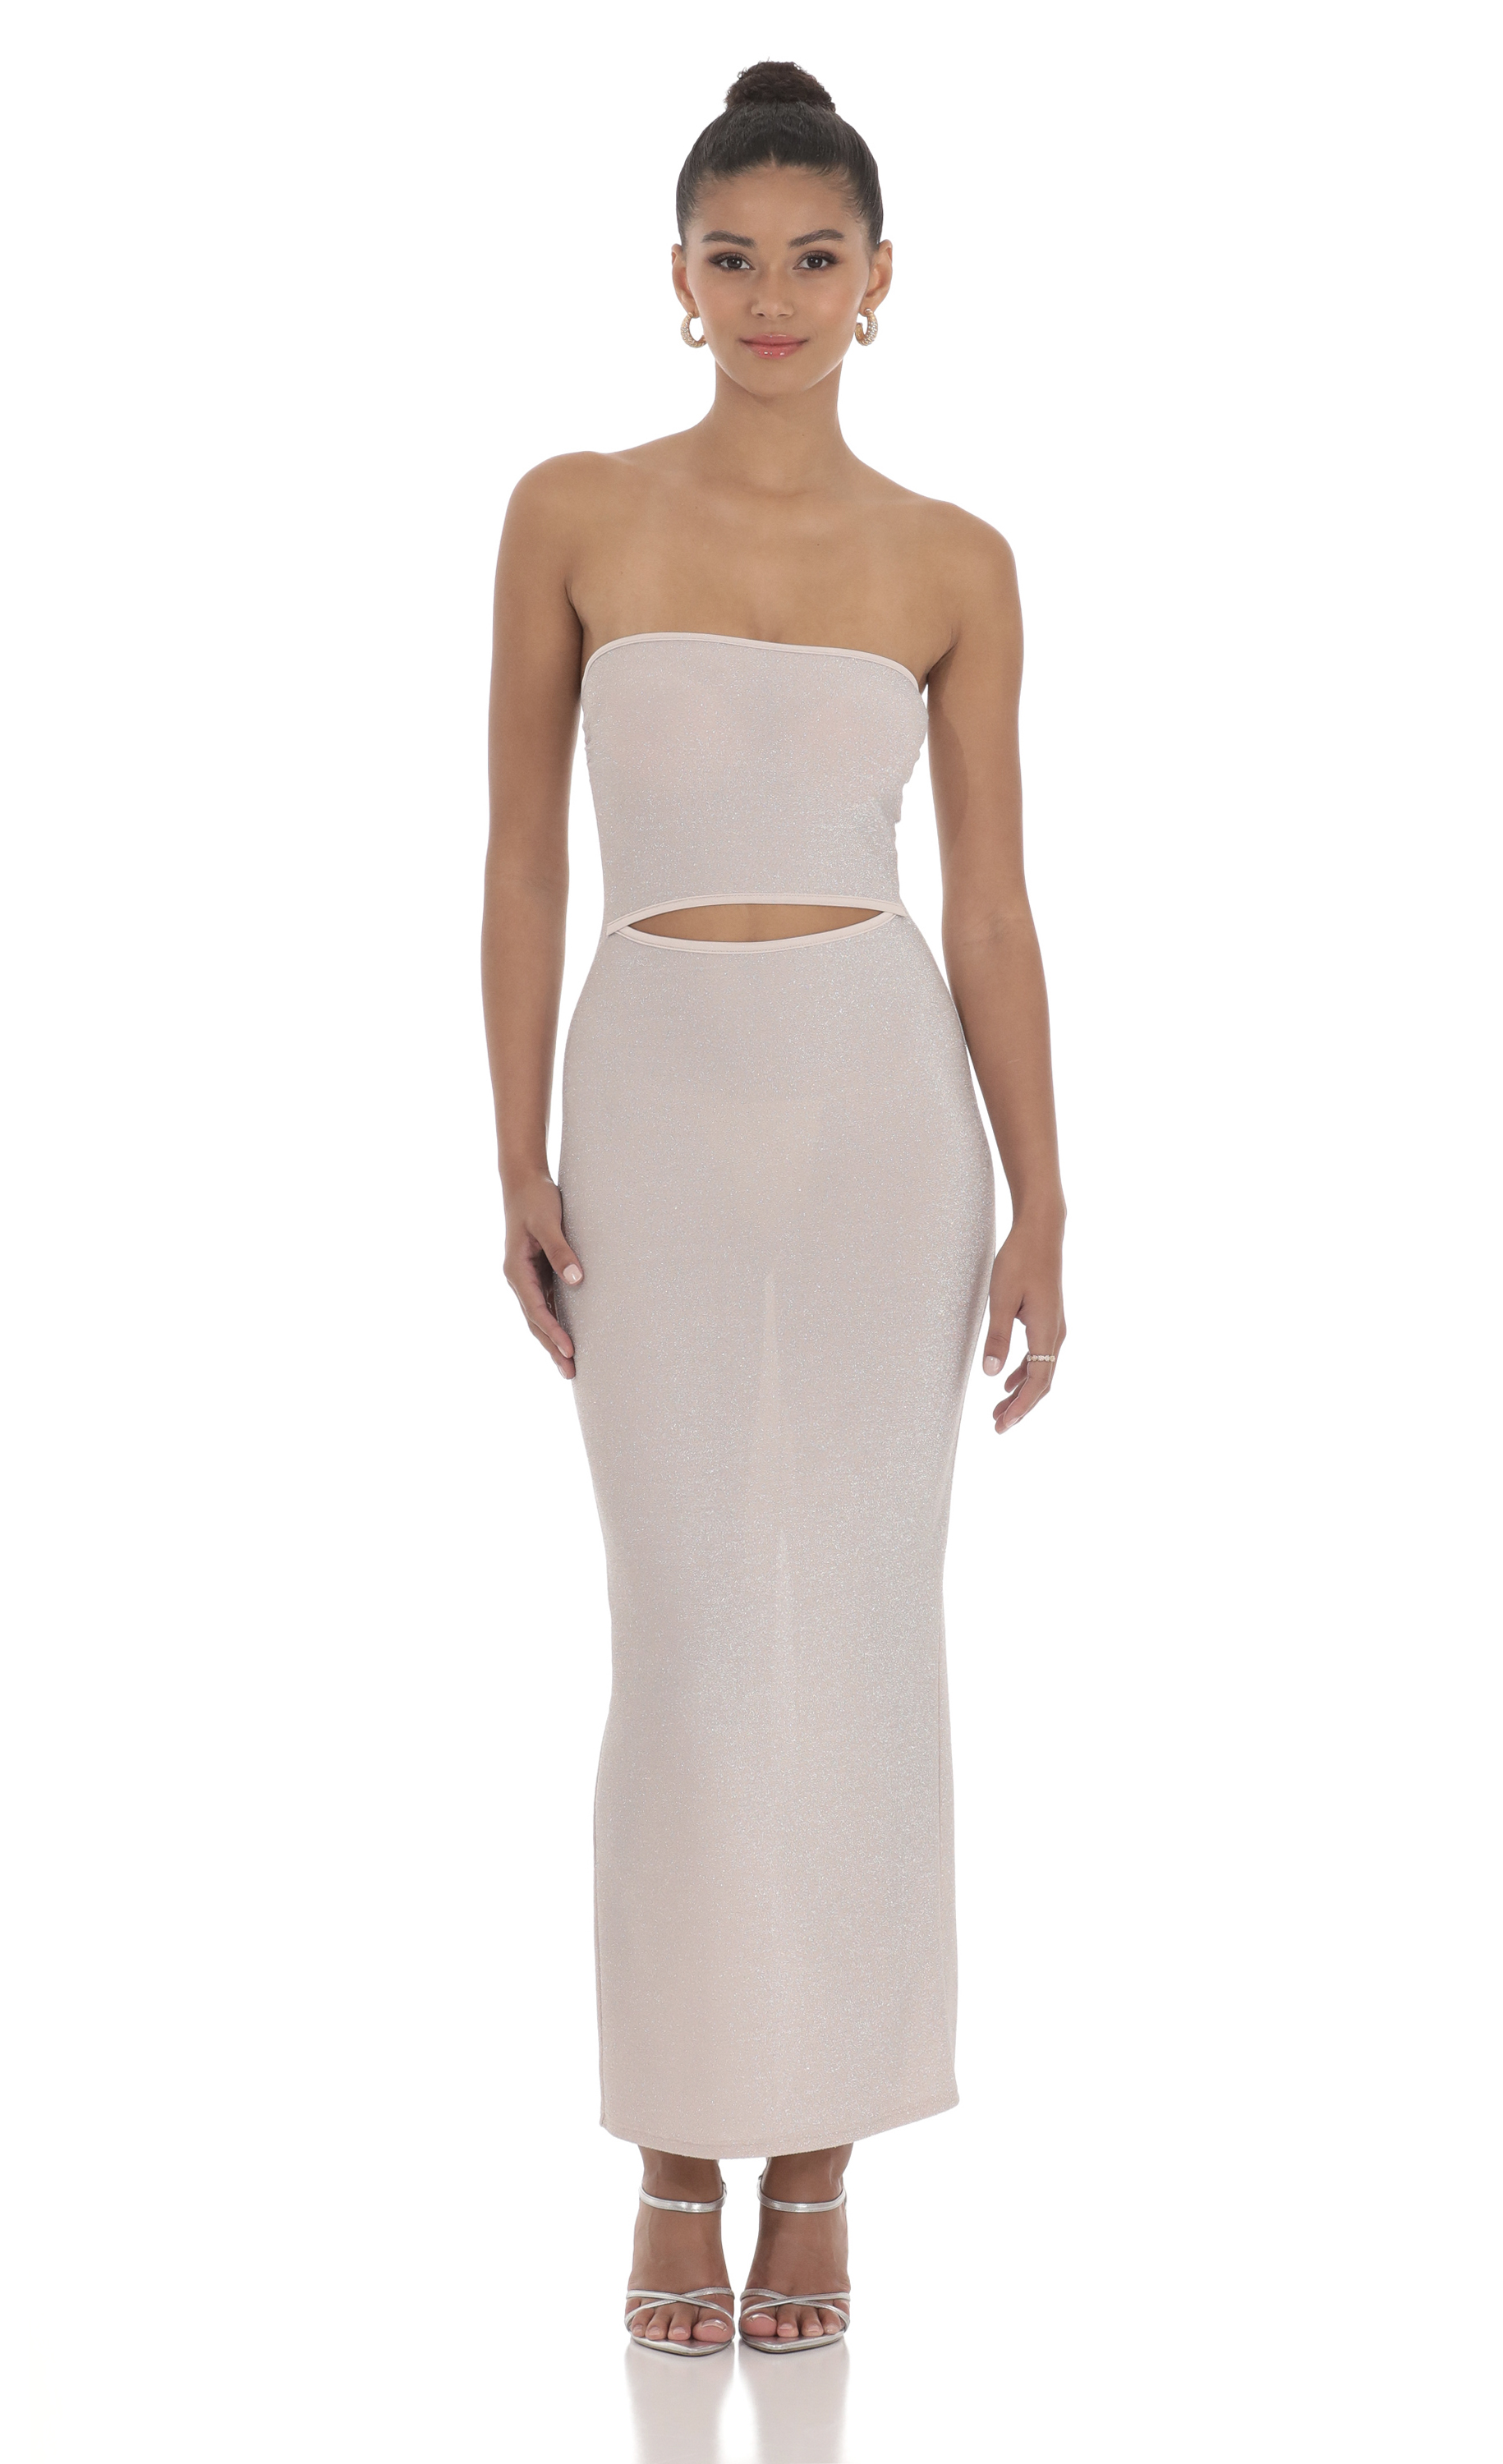 Shimmer Cutout Strapless Maxi Dress in Mauve Pink